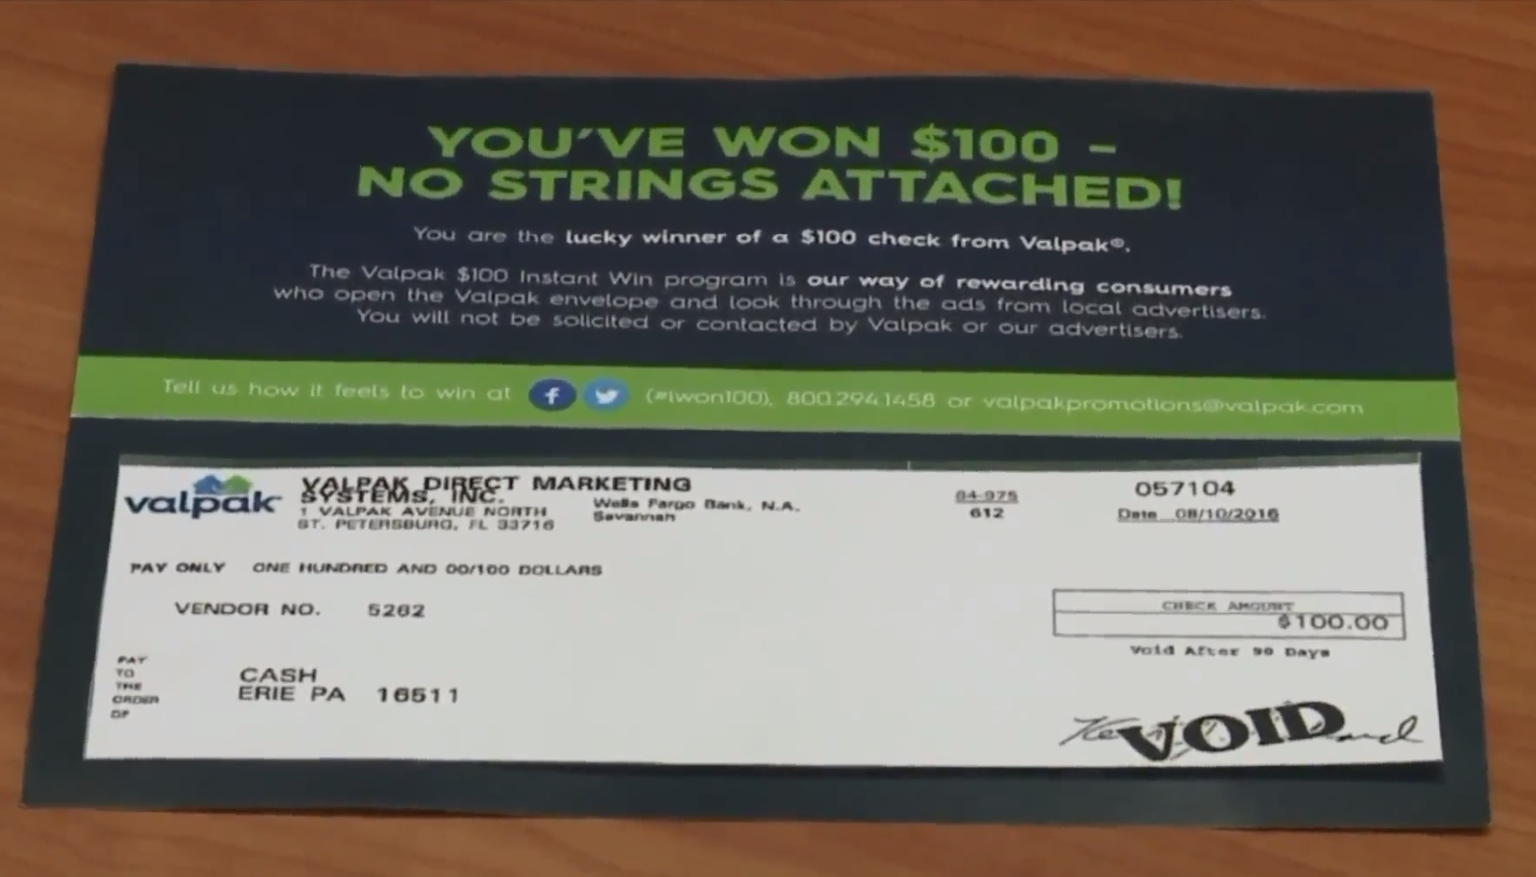 Man trying to sell car gets fake check in the mail - wusa9.com